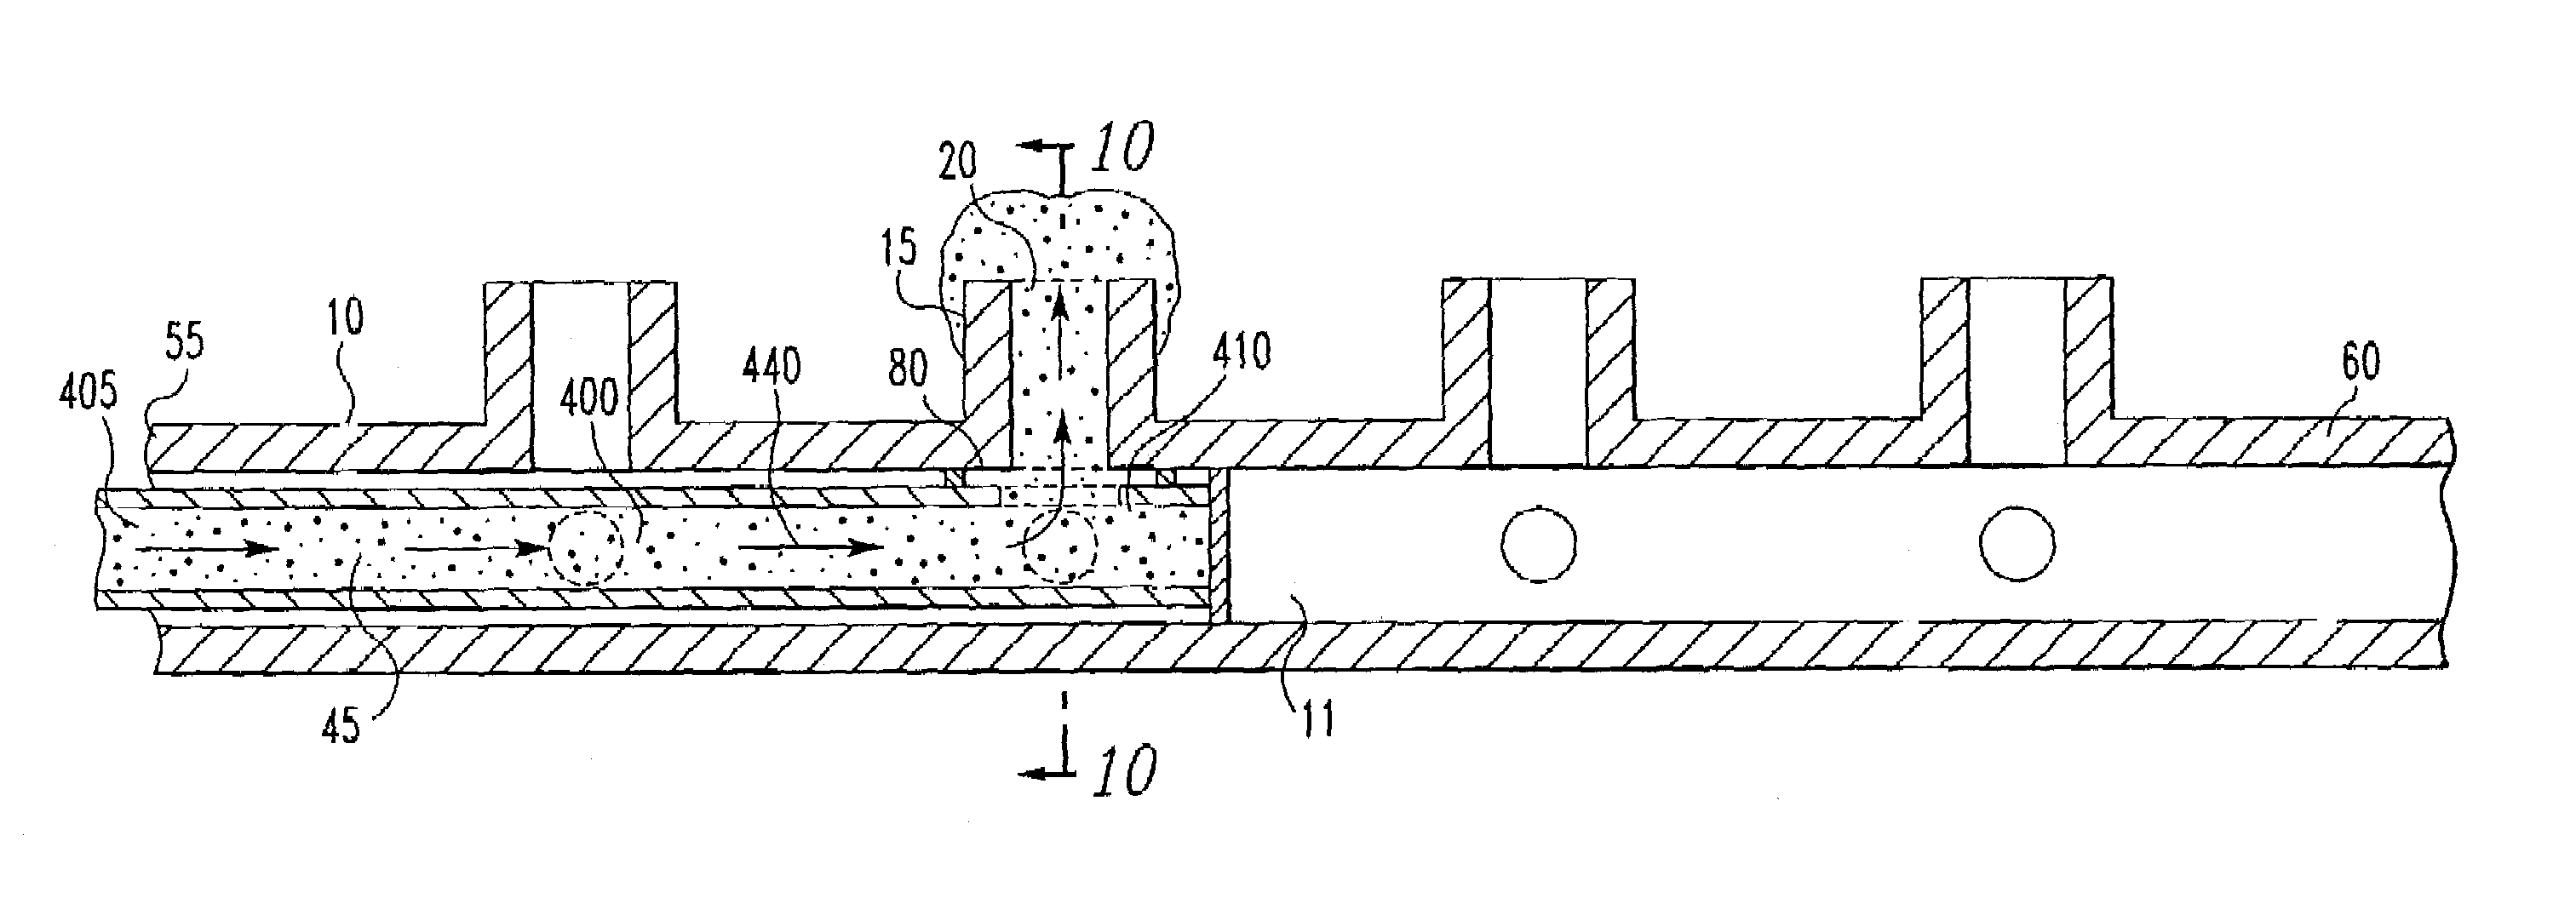 Method and apparatus for abrading the region of intersection between a branch outlet and a passageway in a body